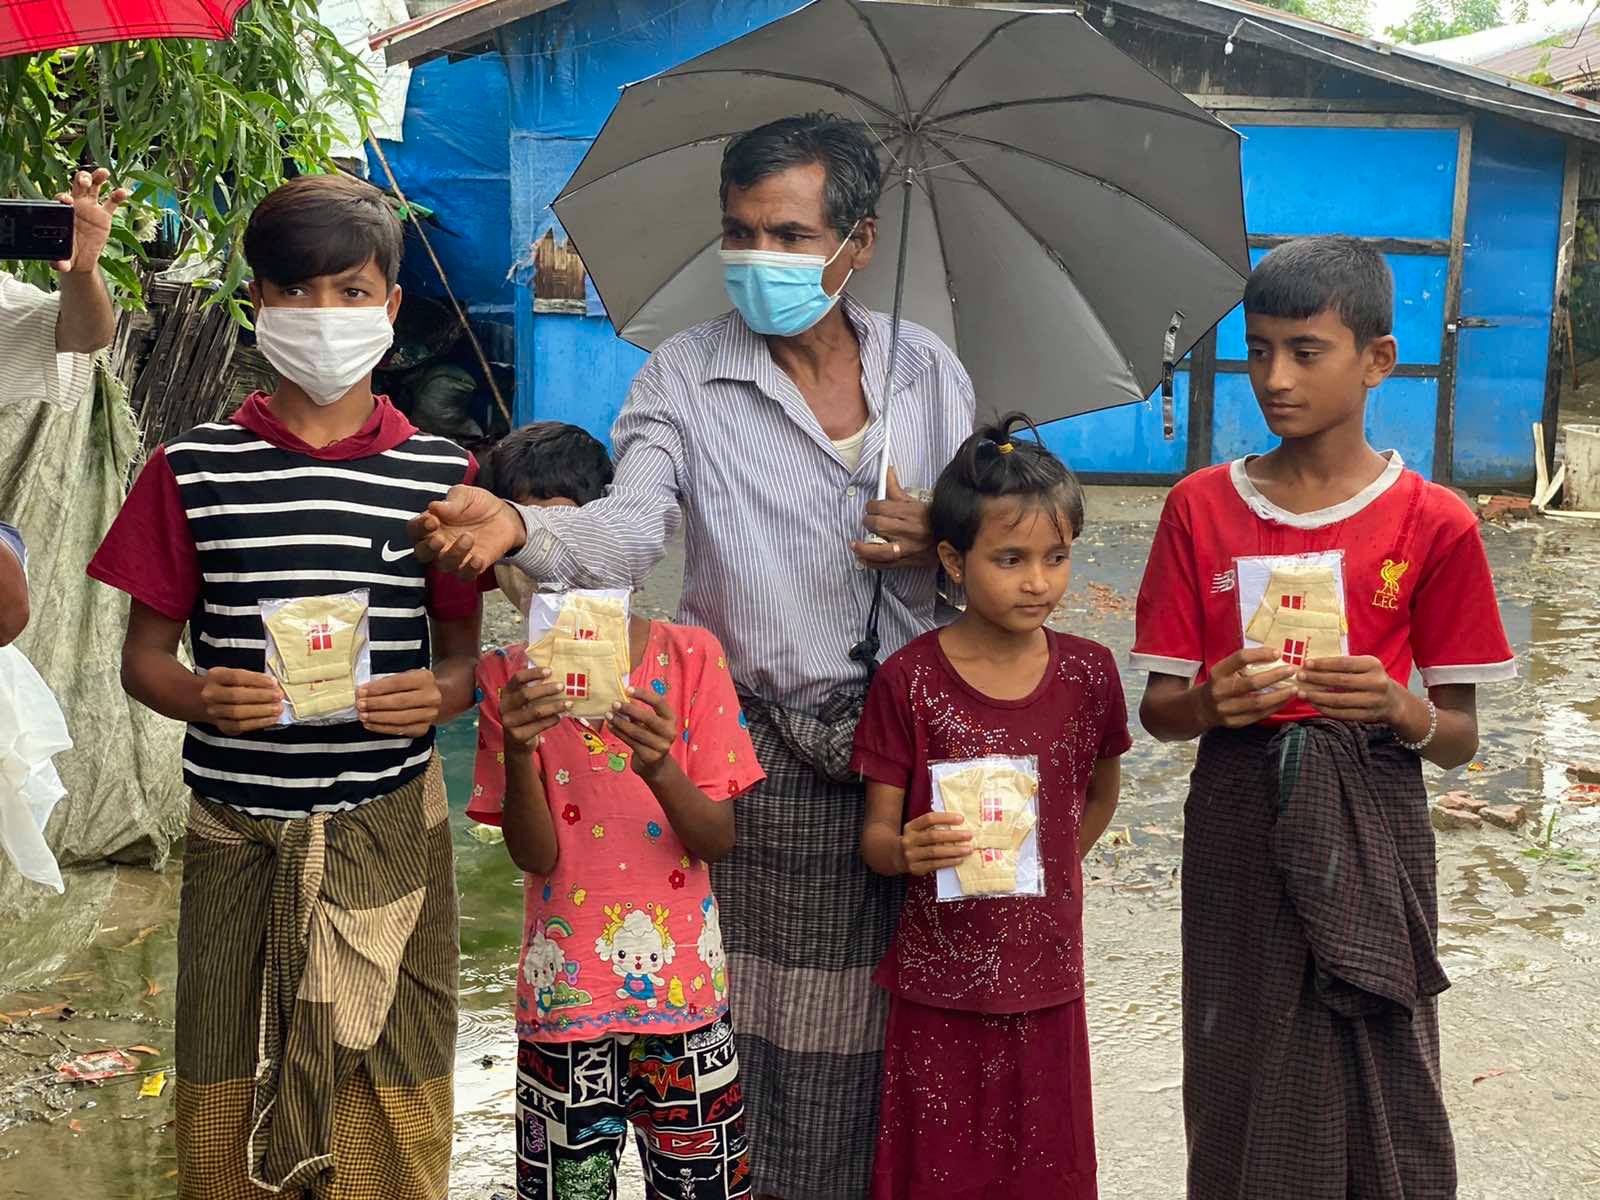 Denmark donated reusable masks to Internally Displaced Persons camps in Rakhine state